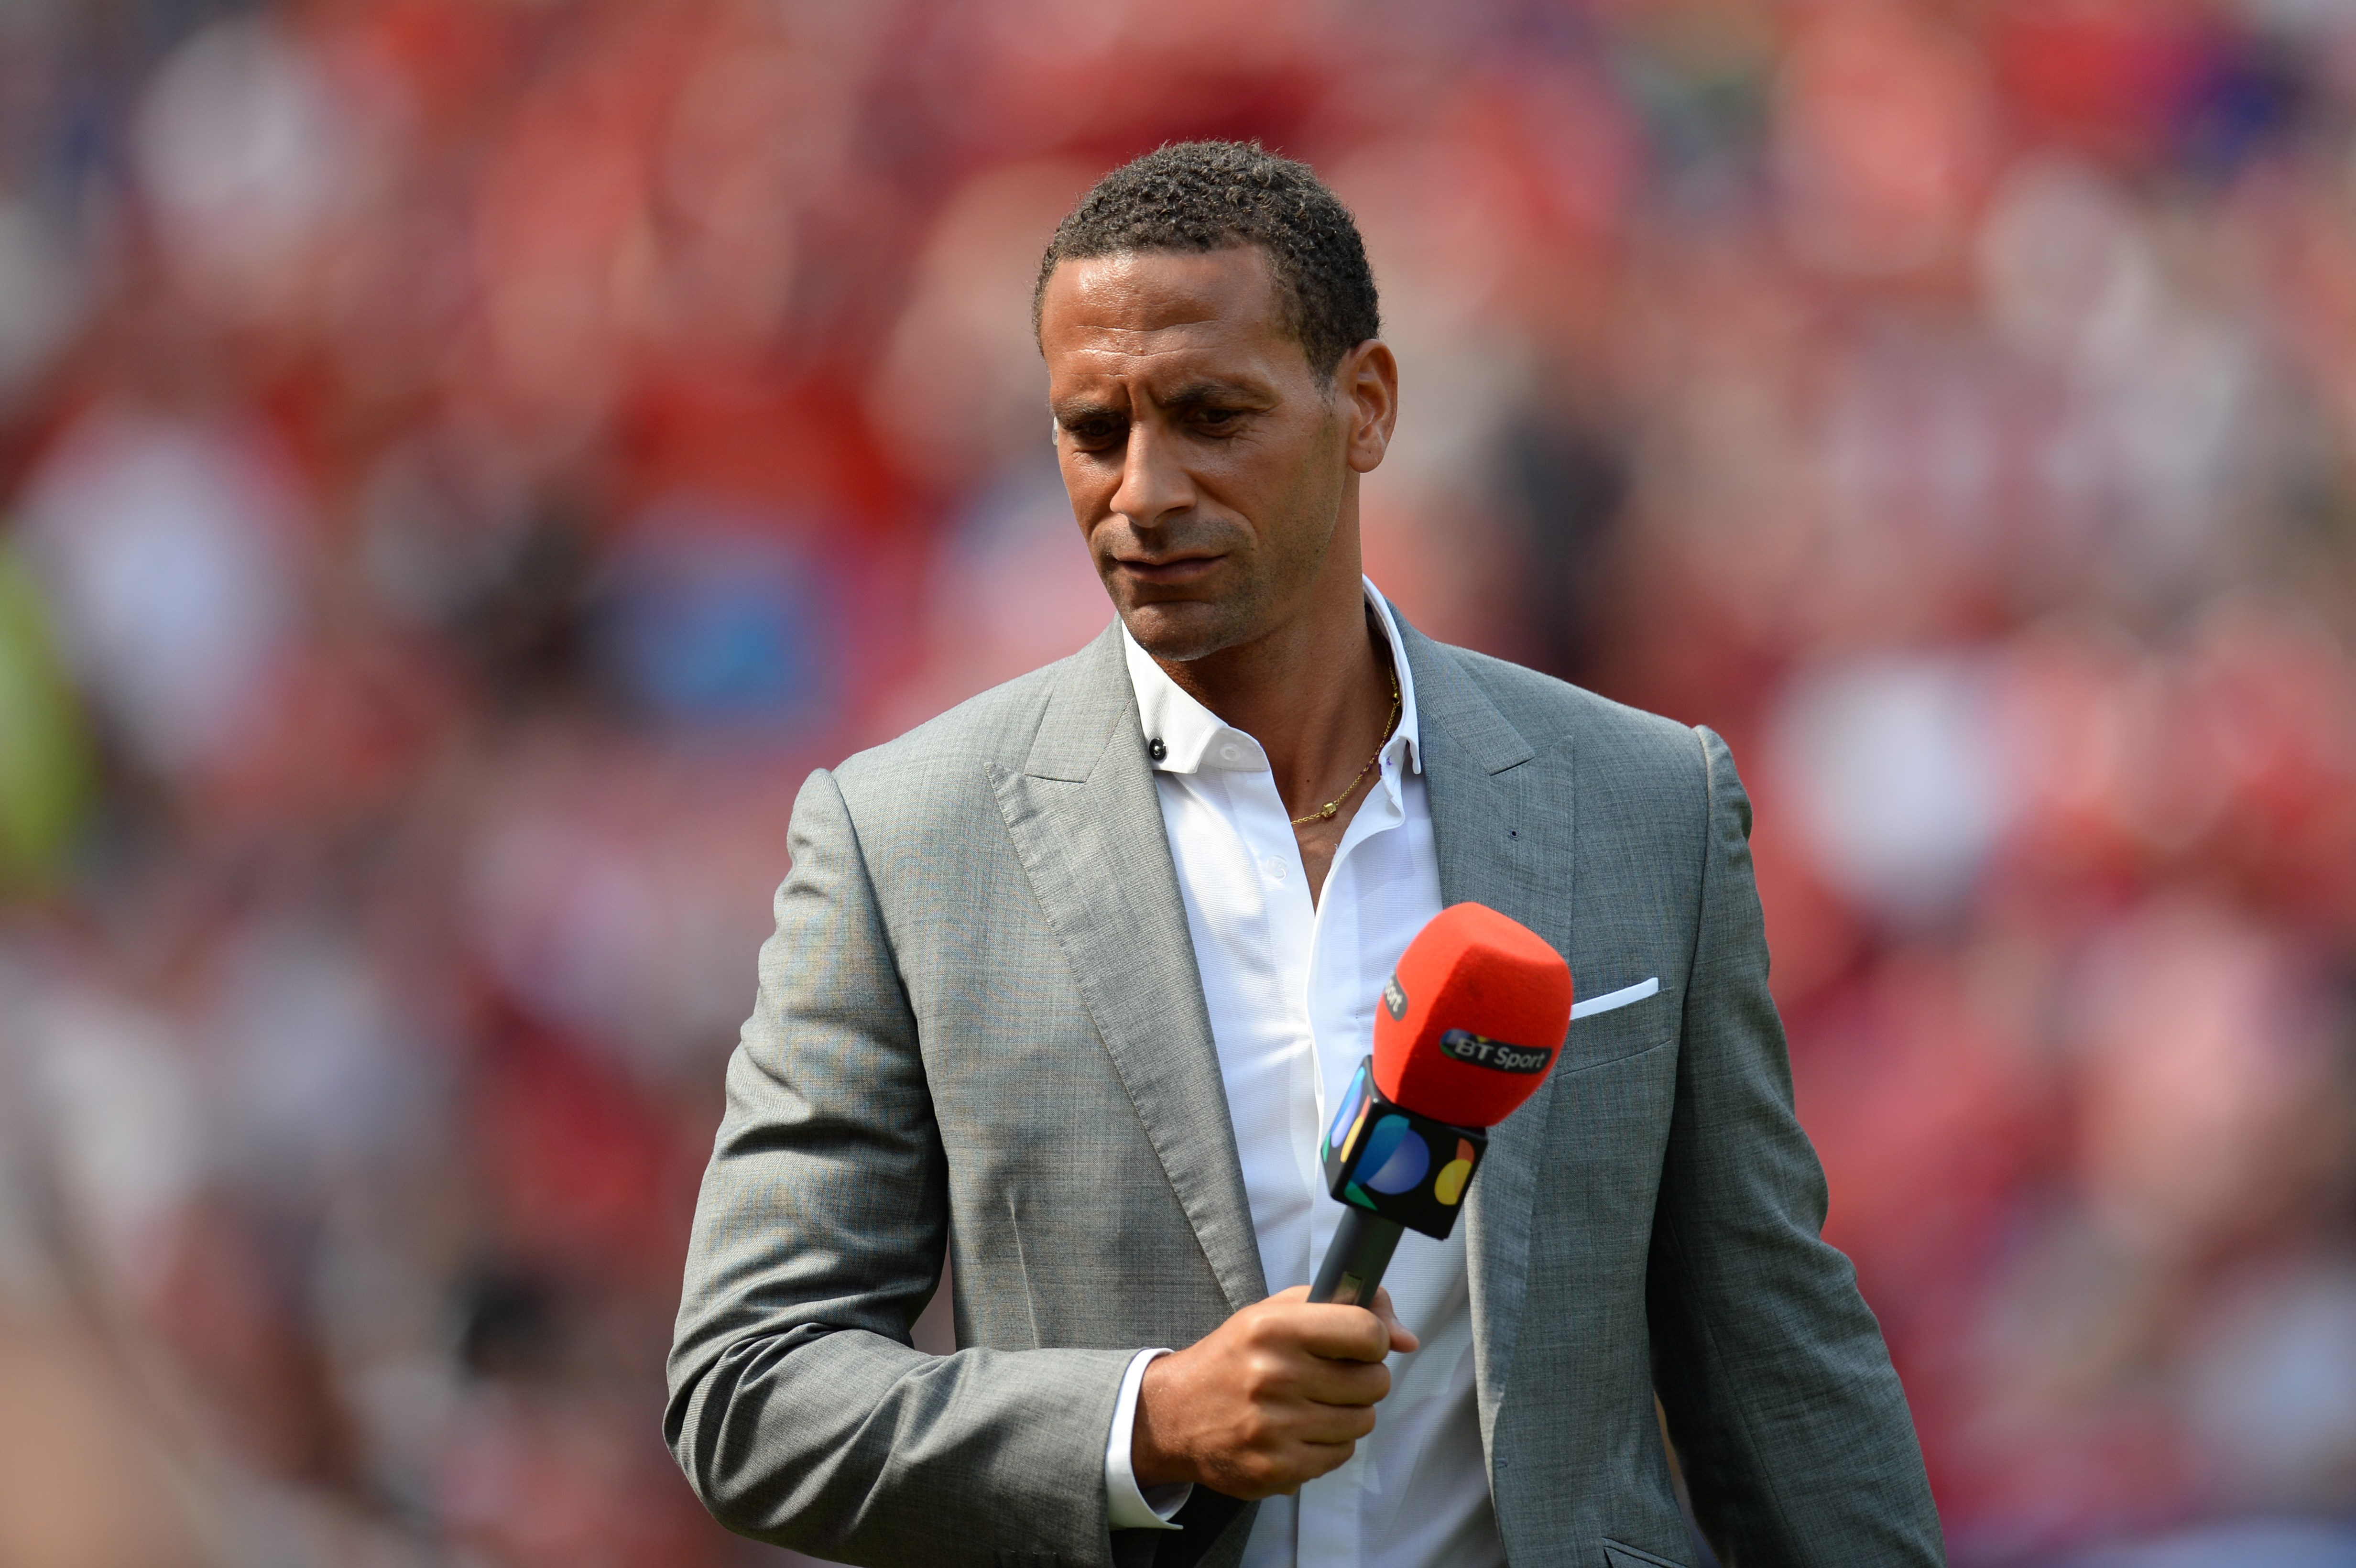 Former Manchester United defender Rio Ferdinand, working as a Television pundit is pictured ahead of the English Premier League football match between Manchester United and Tottenham Hotspur at Old Trafford in Manchester, north west England, on August 8, 2015. AFP PHOTO / OLI SCARFF

RESTRICTED TO EDITORIAL USE. No use with unauthorized audio, video, data, fixture lists, club/league logos or 'live' services. Online in-match use limited to 75 images, no video emulation. No use in betting, games or single club/league/player publications.        (Photo credit should read OLI SCARFF/AFP/Getty Images)